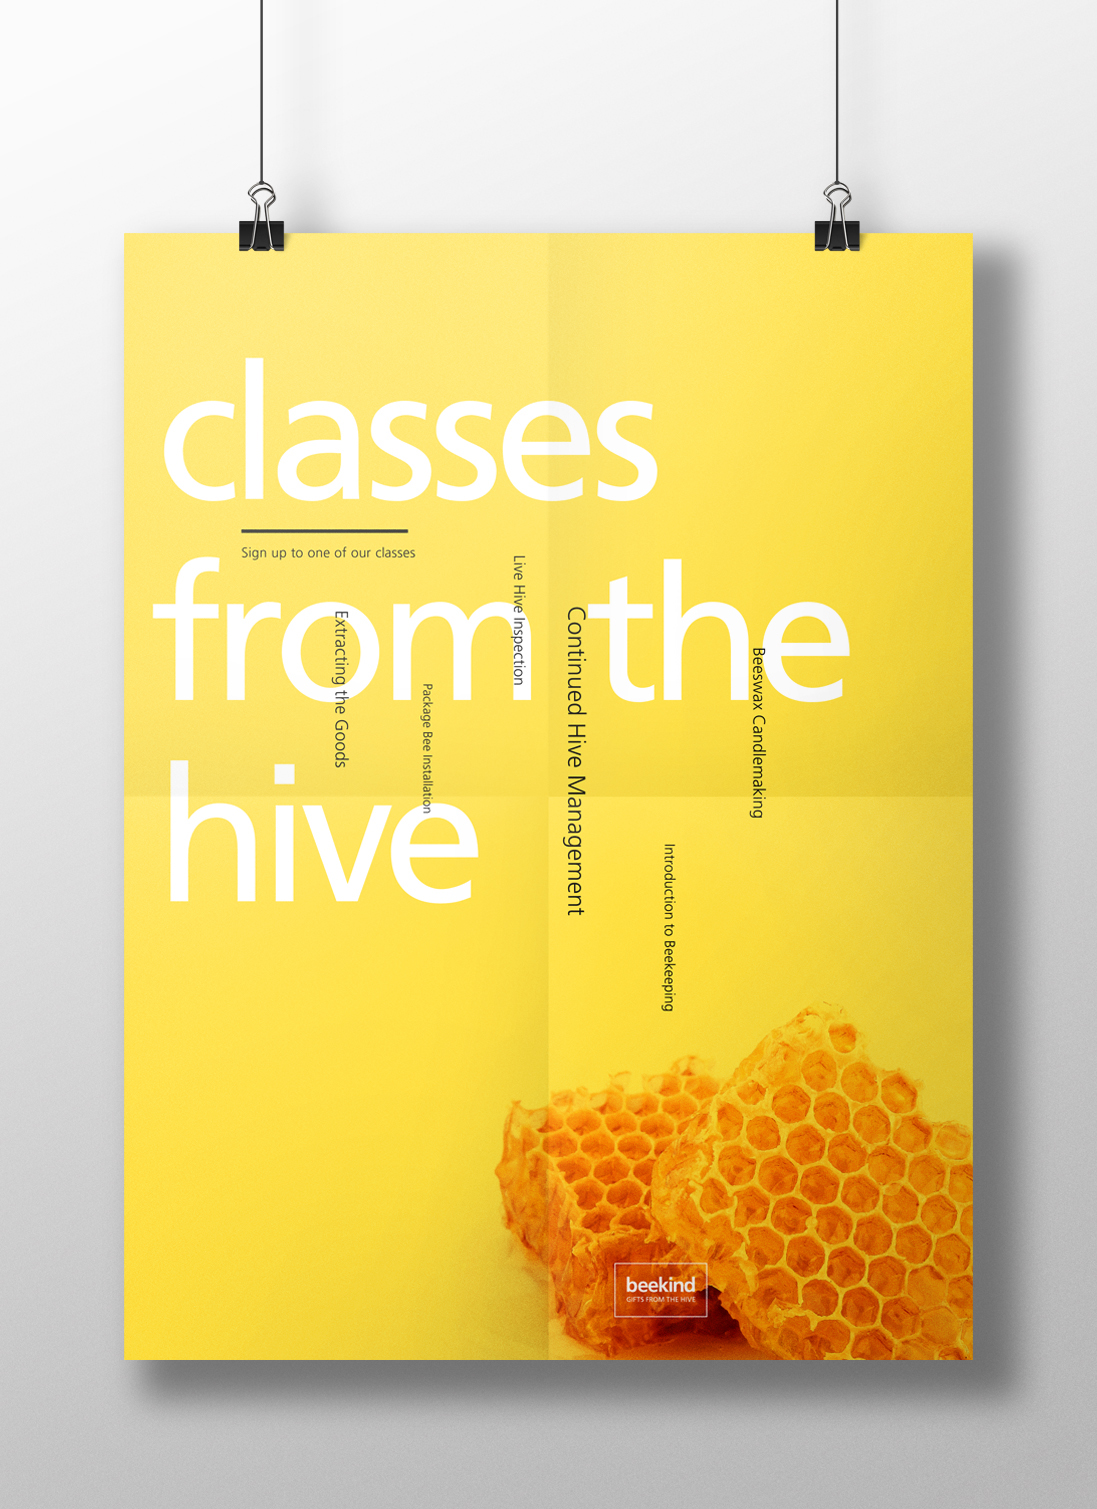 swiss colorful identity redesign product Packaging Poster series jar honey Catalogue